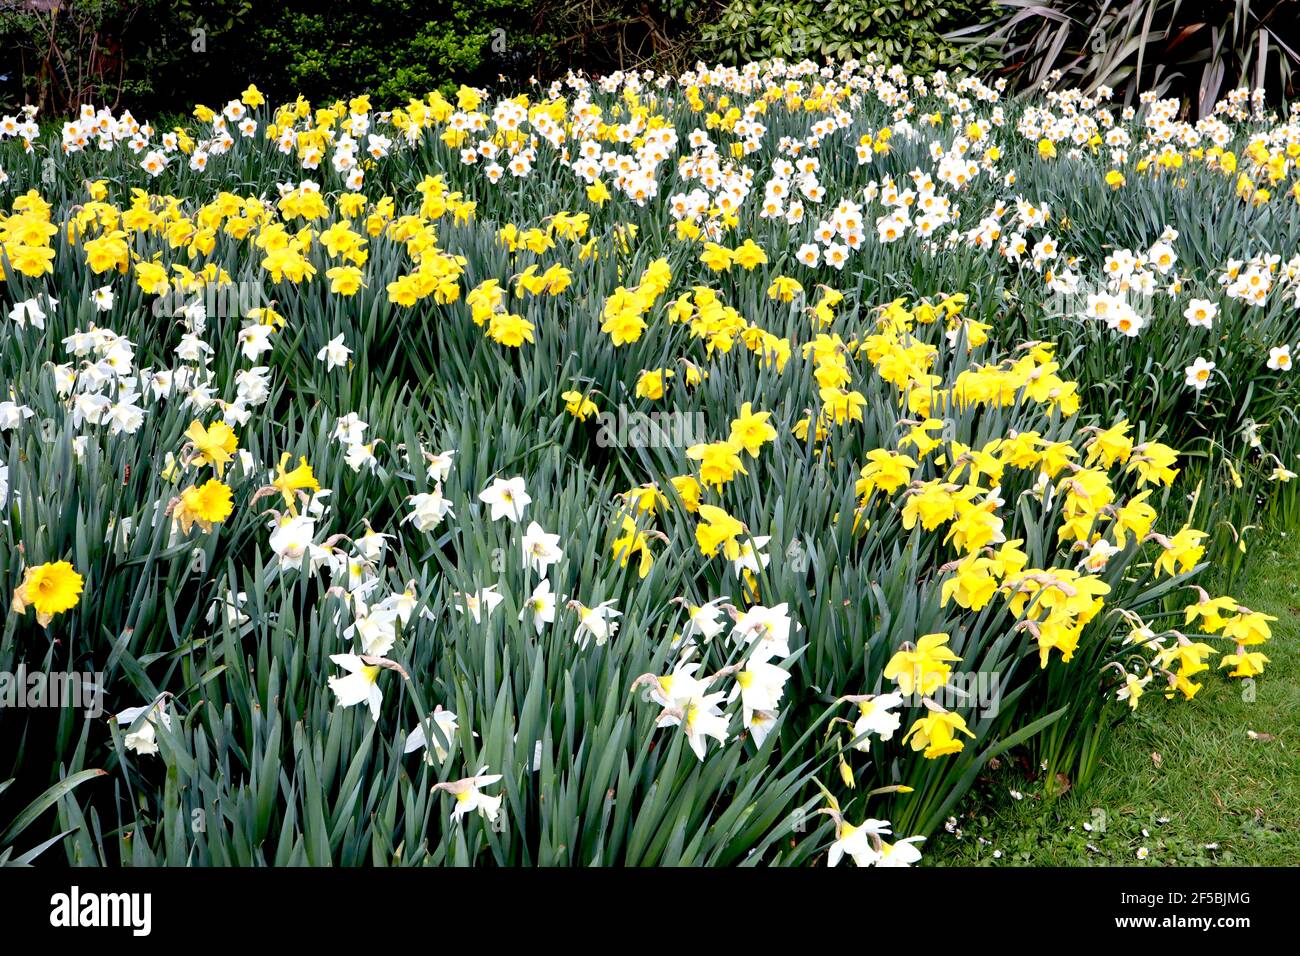 Narcissus / Daffodil ‘Barrett Browning’  Narcissus / Daffodil ‘Dutch Master’ Narcissus / Daffodil ‘Mount Hood’ March, England, UK Stock Photo